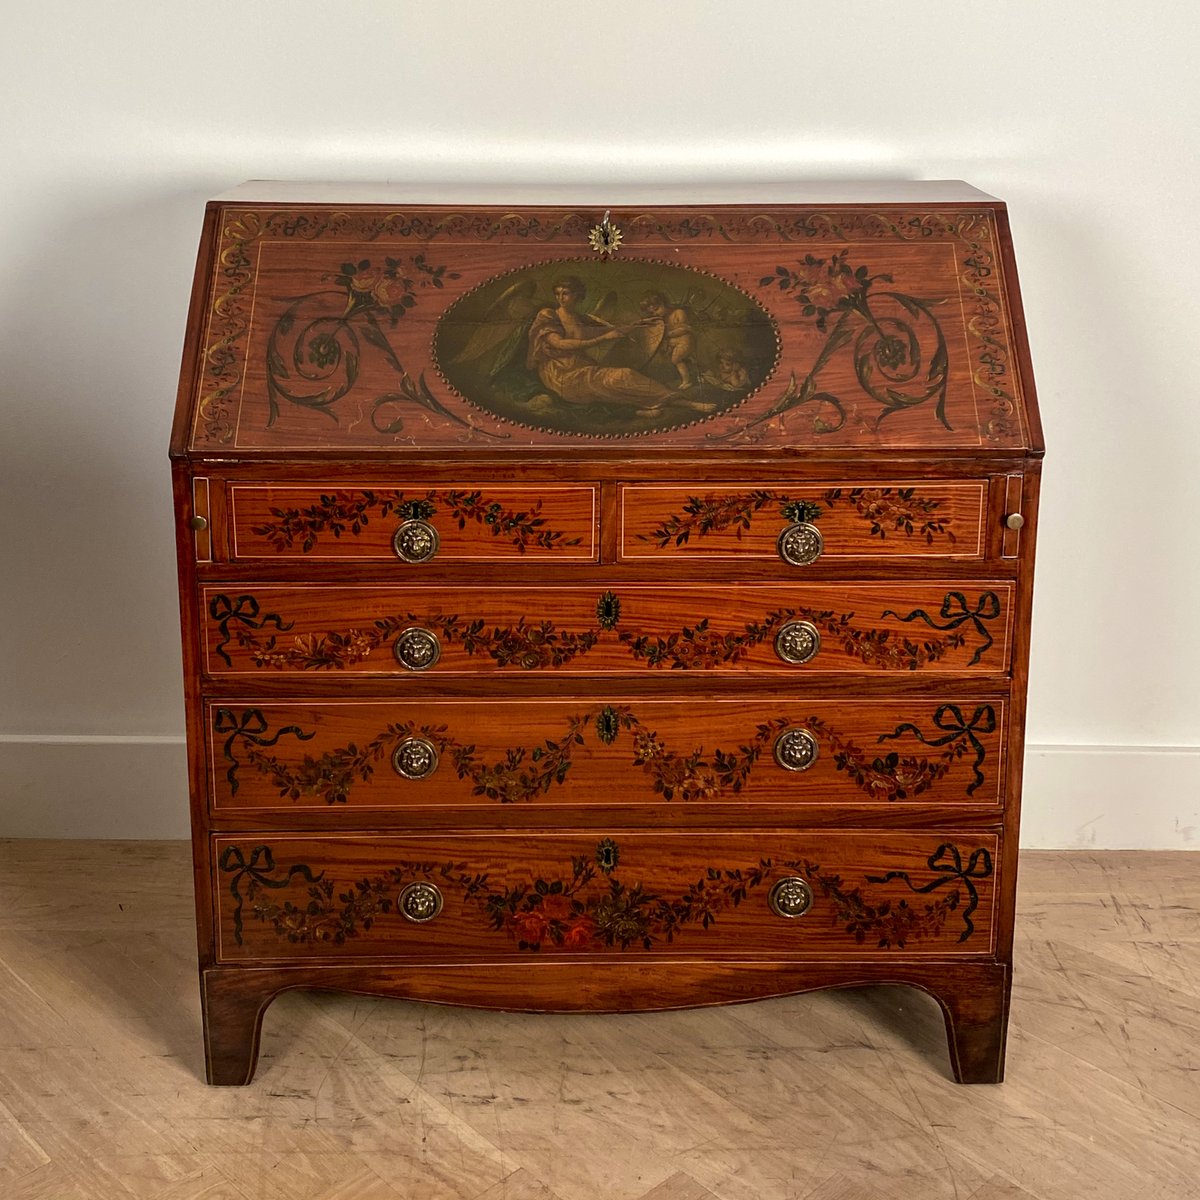 Georgian Fancy Painted Slant Front Desk, England Circa Early 19th Century
An early 19th Century George III Period fancy painted satinwood slant front desk
43' High 39.25' Wide 20' Deep
#georgian #slantfrontdesk #english #GeorgeIII #frontdesk #painteddesk #englishdesk #aaxsf